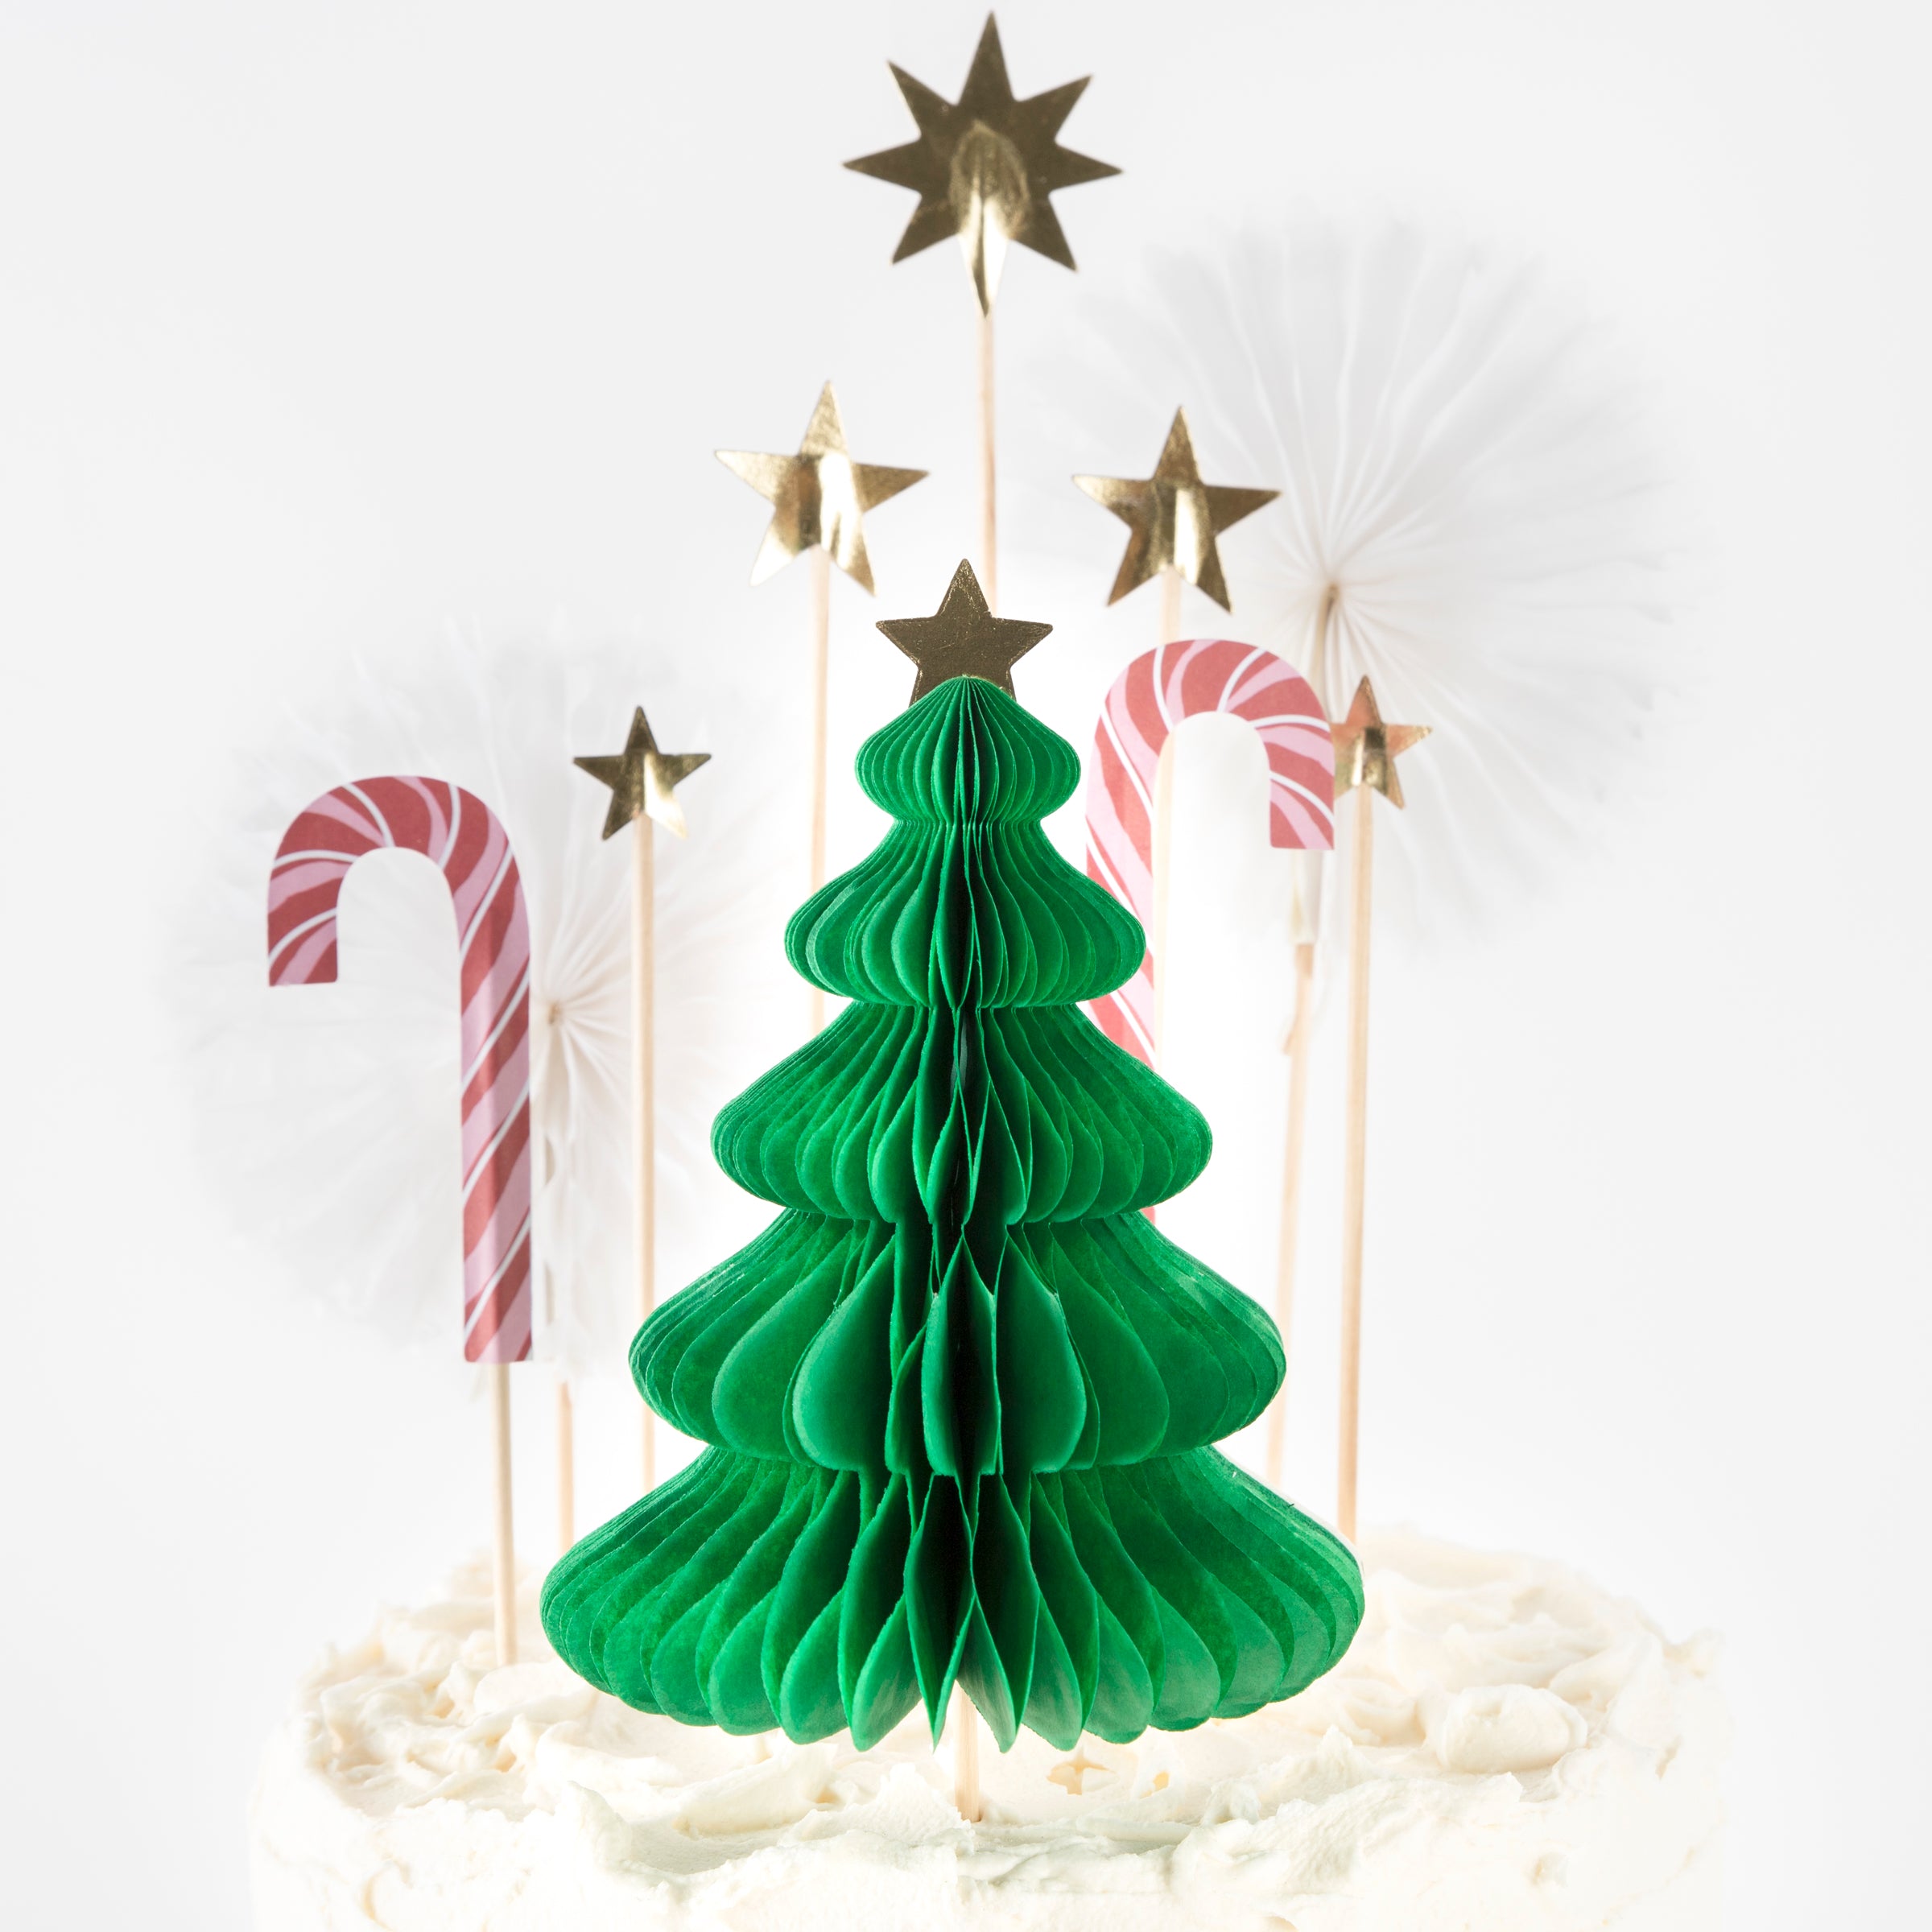 Our special baking set for kids includes Christmas cookie cutters, Christmas cake toppers and a cake stand.